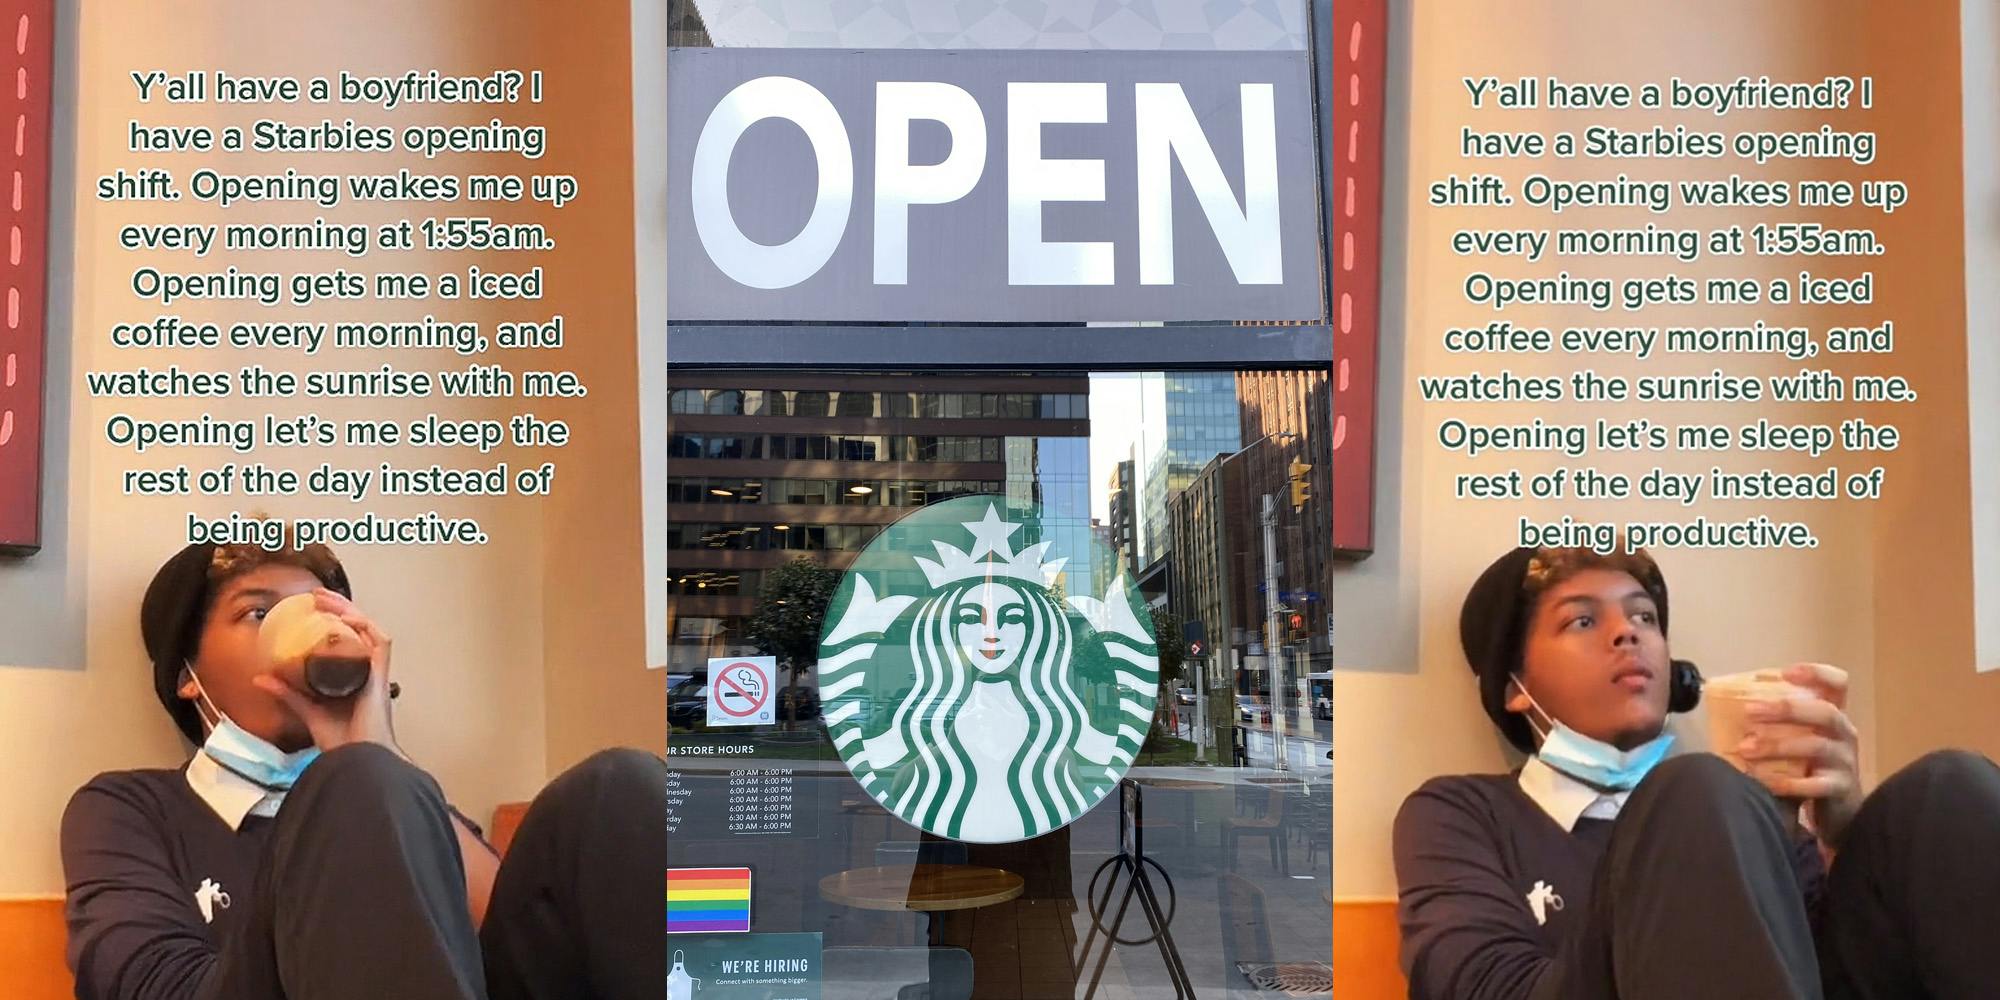 Starbucks employee drinking coffee caption "Y'all have a boyfriend? I have a Starbies opening shift. Opening wakes me up every morning at 1:55am. Opening gets me a iced coffee every morning, and watches the sunrise with me. Opening let's me sleep the rest of the day instead of being productive" (l) Starbucks sign on glass with "OPEN" sign above (c) Starbucks employee holding coffee caption "Y'all have a boyfriend? I have a Starbies opening shift. Opening wakes me up every morning at 1:55am. Opening gets me a iced coffee every morning, and watches the sunrise with me. Opening let's me sleep the rest of the day instead of being productive" (r)